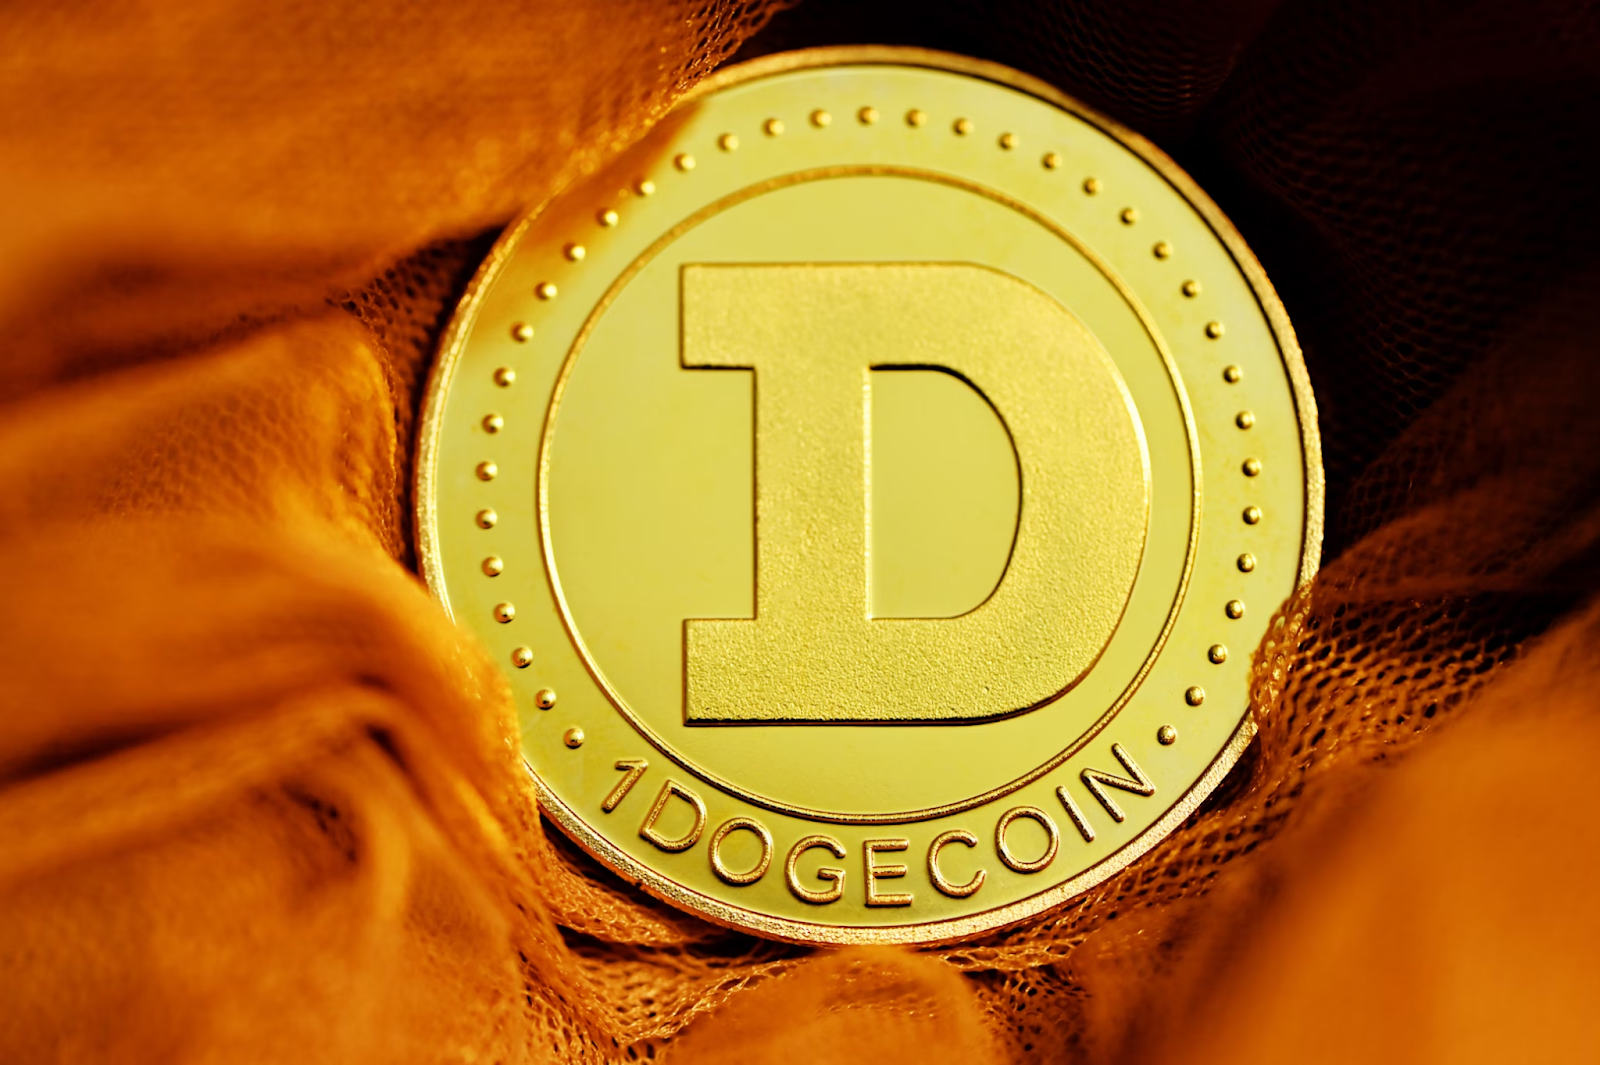 Dogecoin Trading: A Surge in Investor Interest